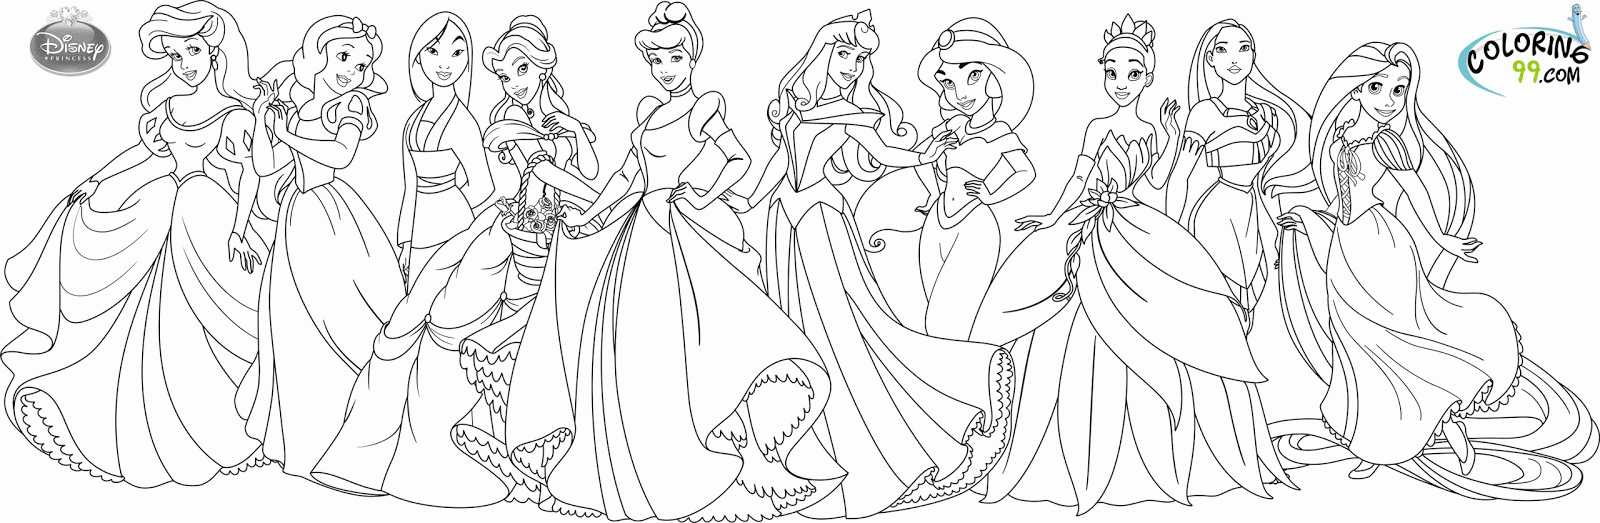 All Disney Princess   Coloring Pages For Kids And For Adults ...